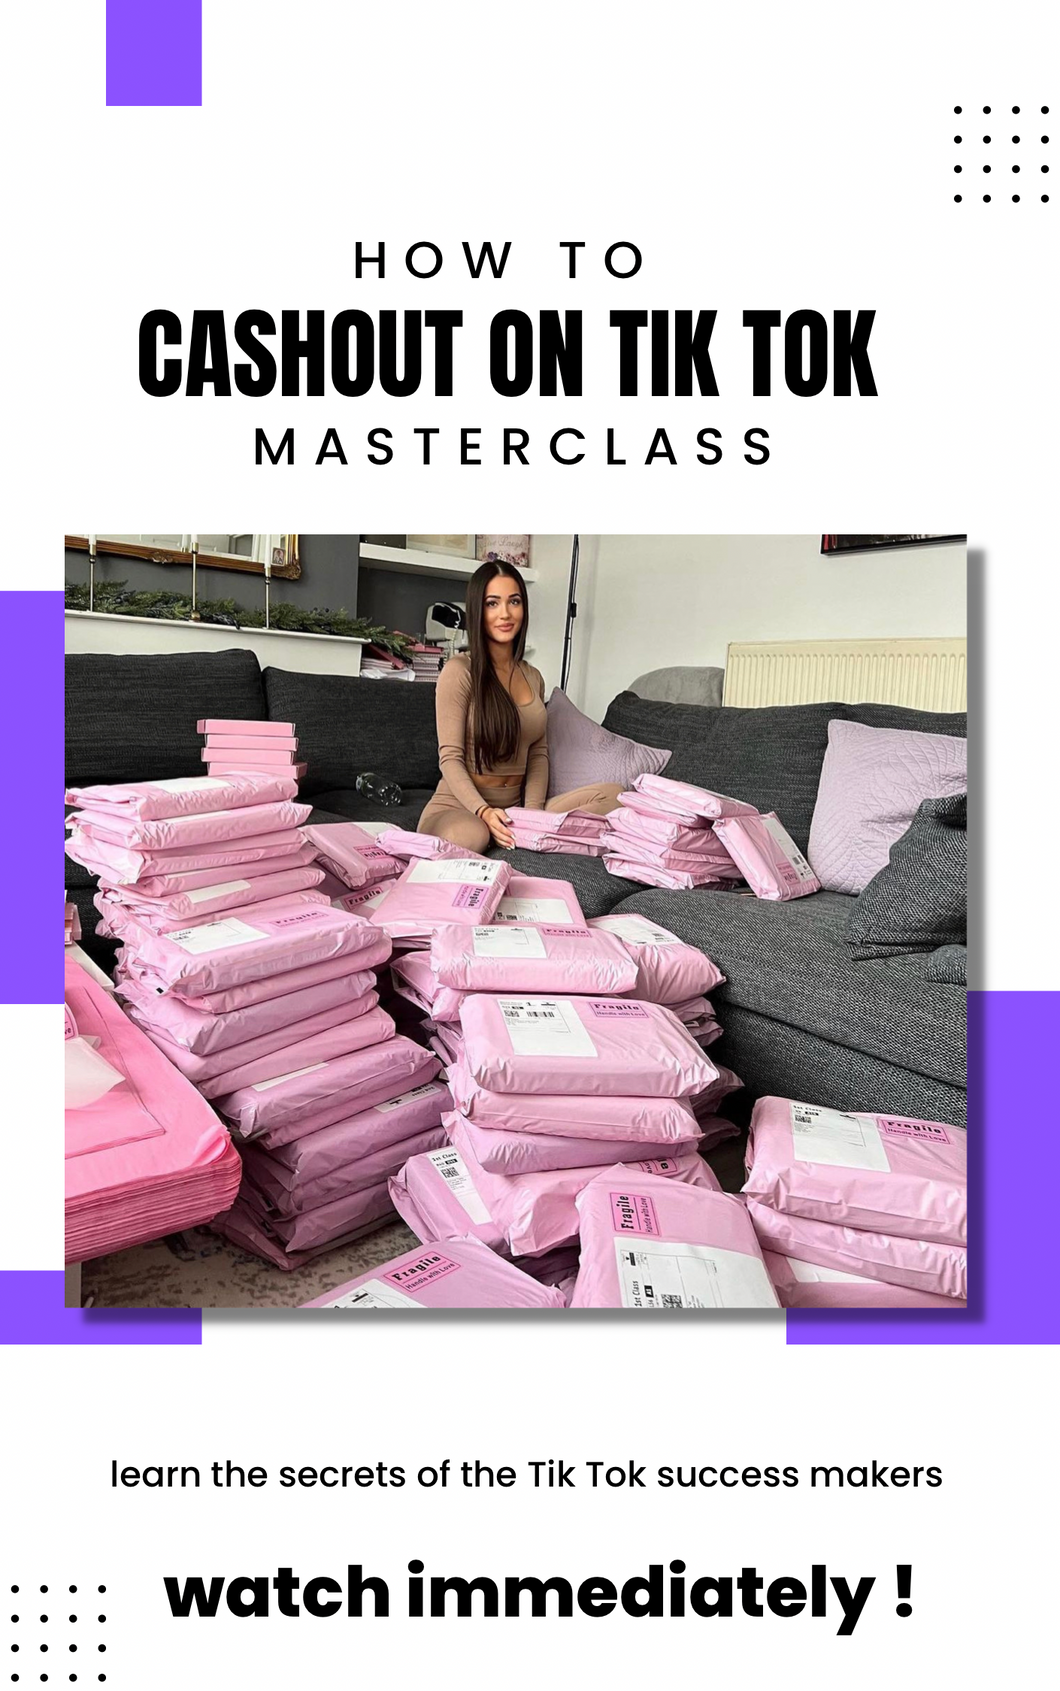 How To Cashout/Go Viral On Tik Tok  (Watch Instantly)